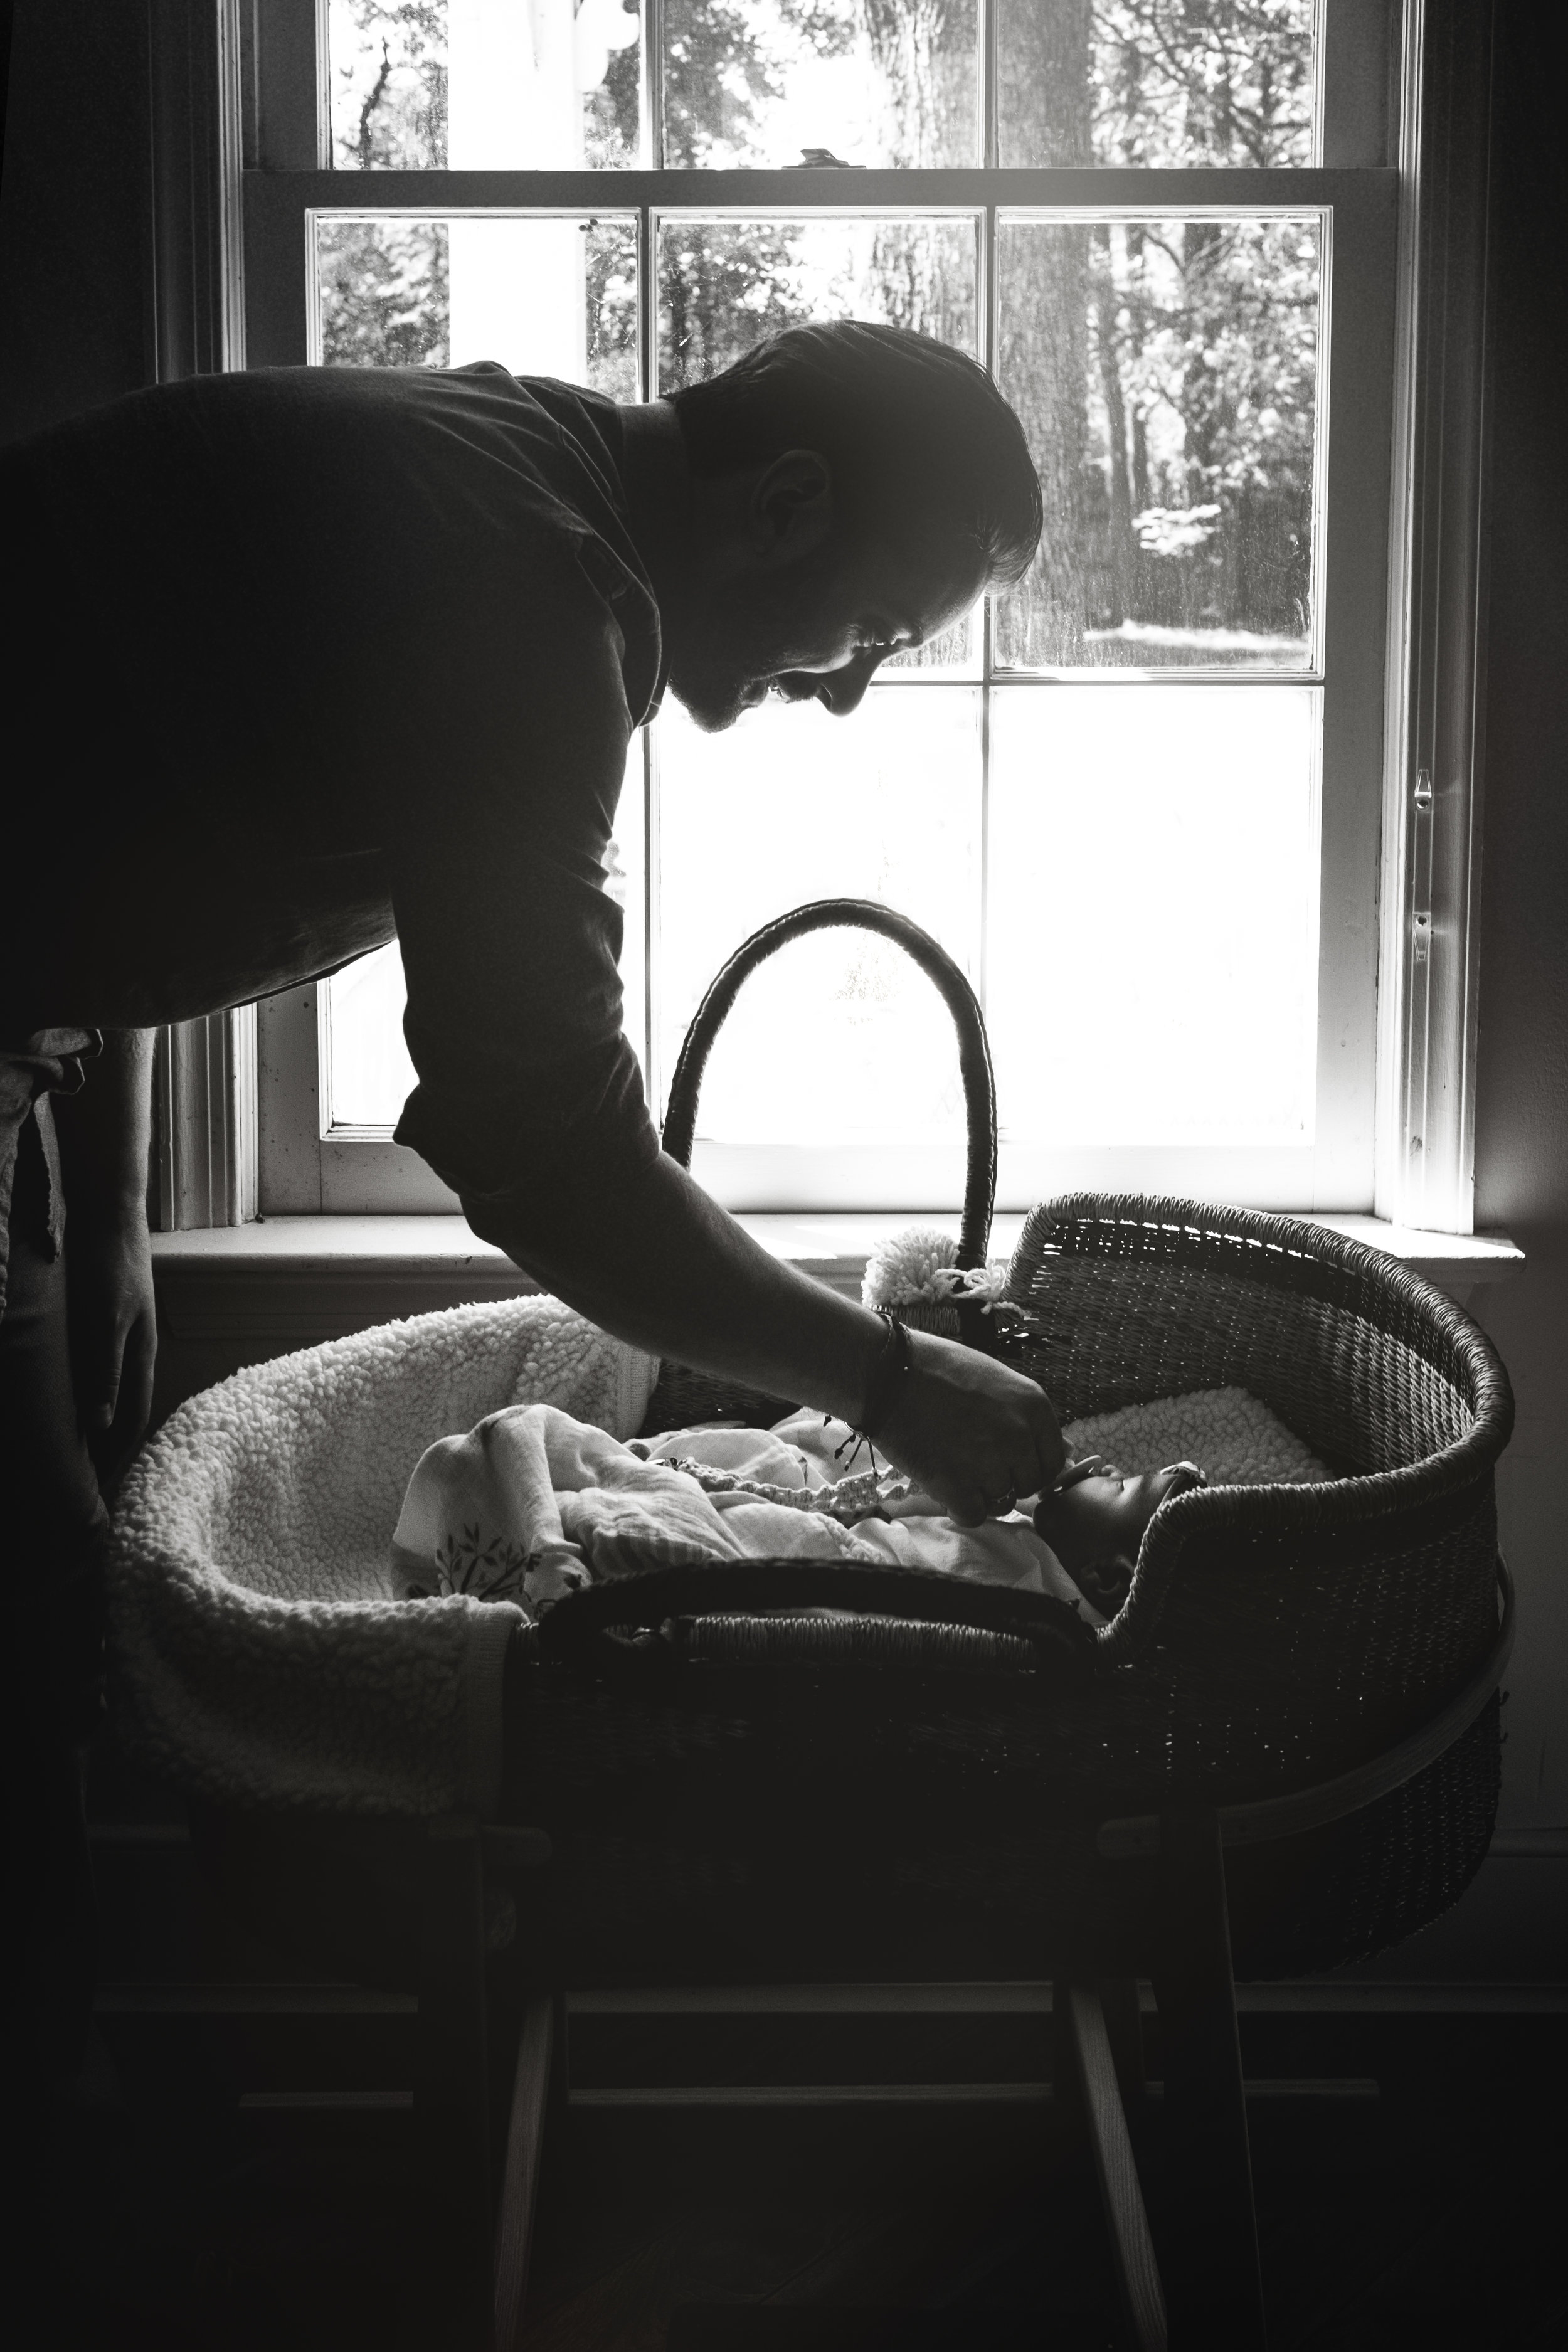 black and white silhouette photograph of father tending to baby daughter in bassinet